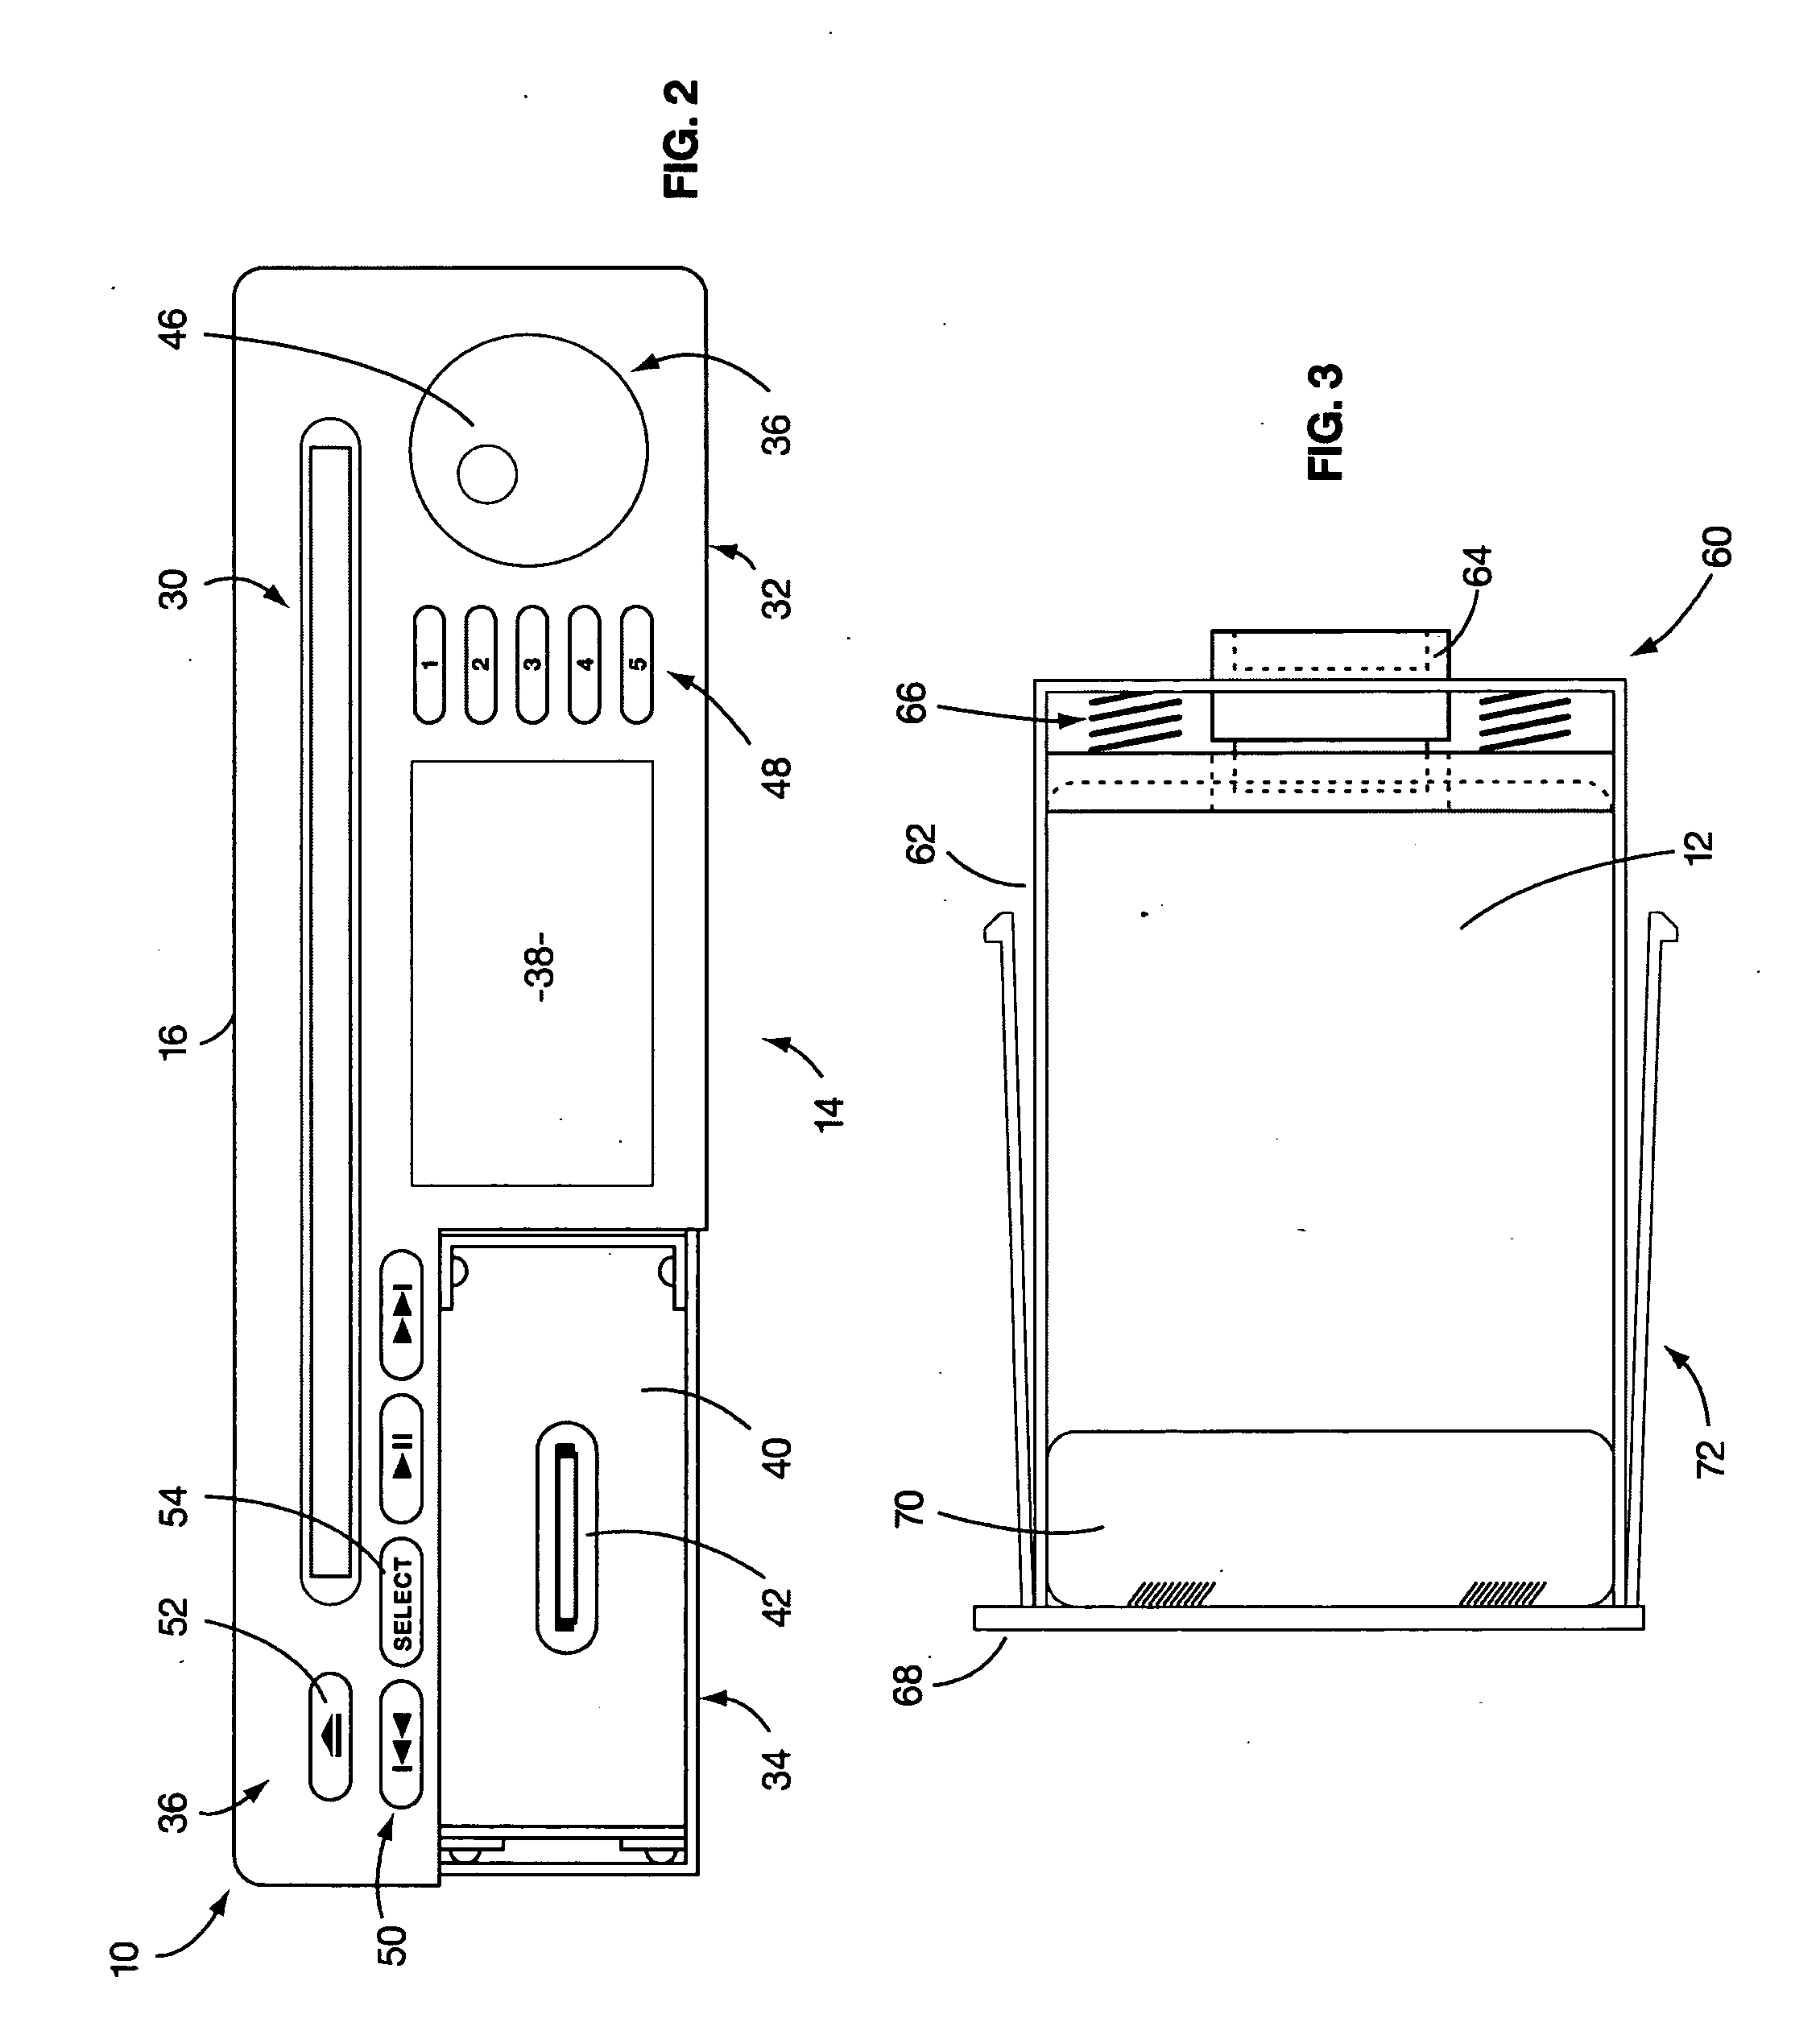 System for listening to playback of music files by a portable audio device while in a vehicle